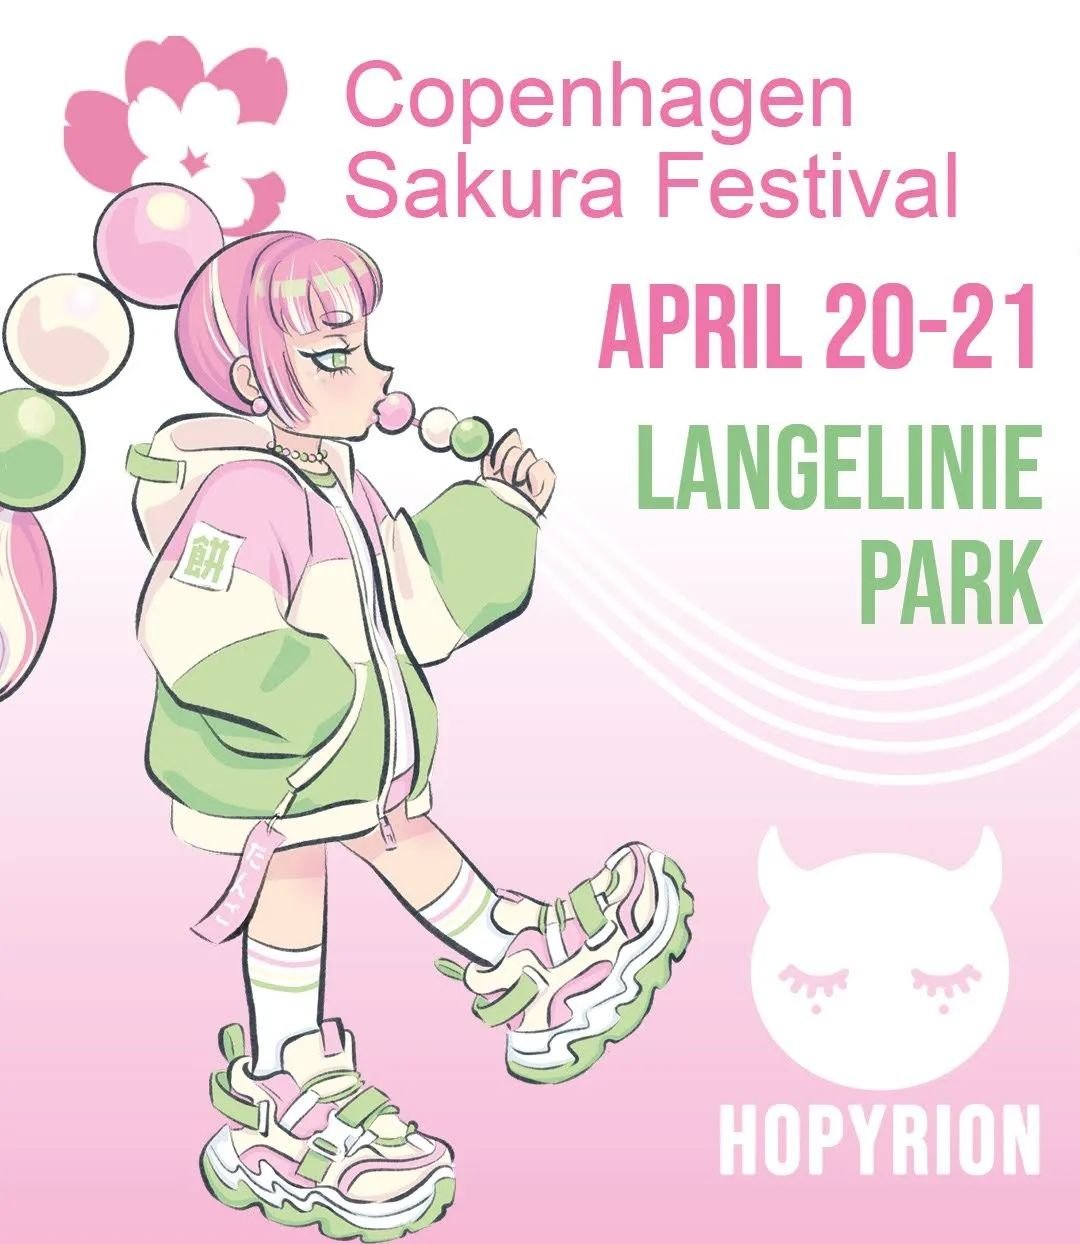 This weekend I'll have a little pop-up at @copenhagensakurafestival 🌸✨

📍Langelinie Park - Tent 36: upstairs at the platform with the tents and sumo wrestling. See the map for reference. Next to @noaburo 💖

It'll be my second time and I'll have an